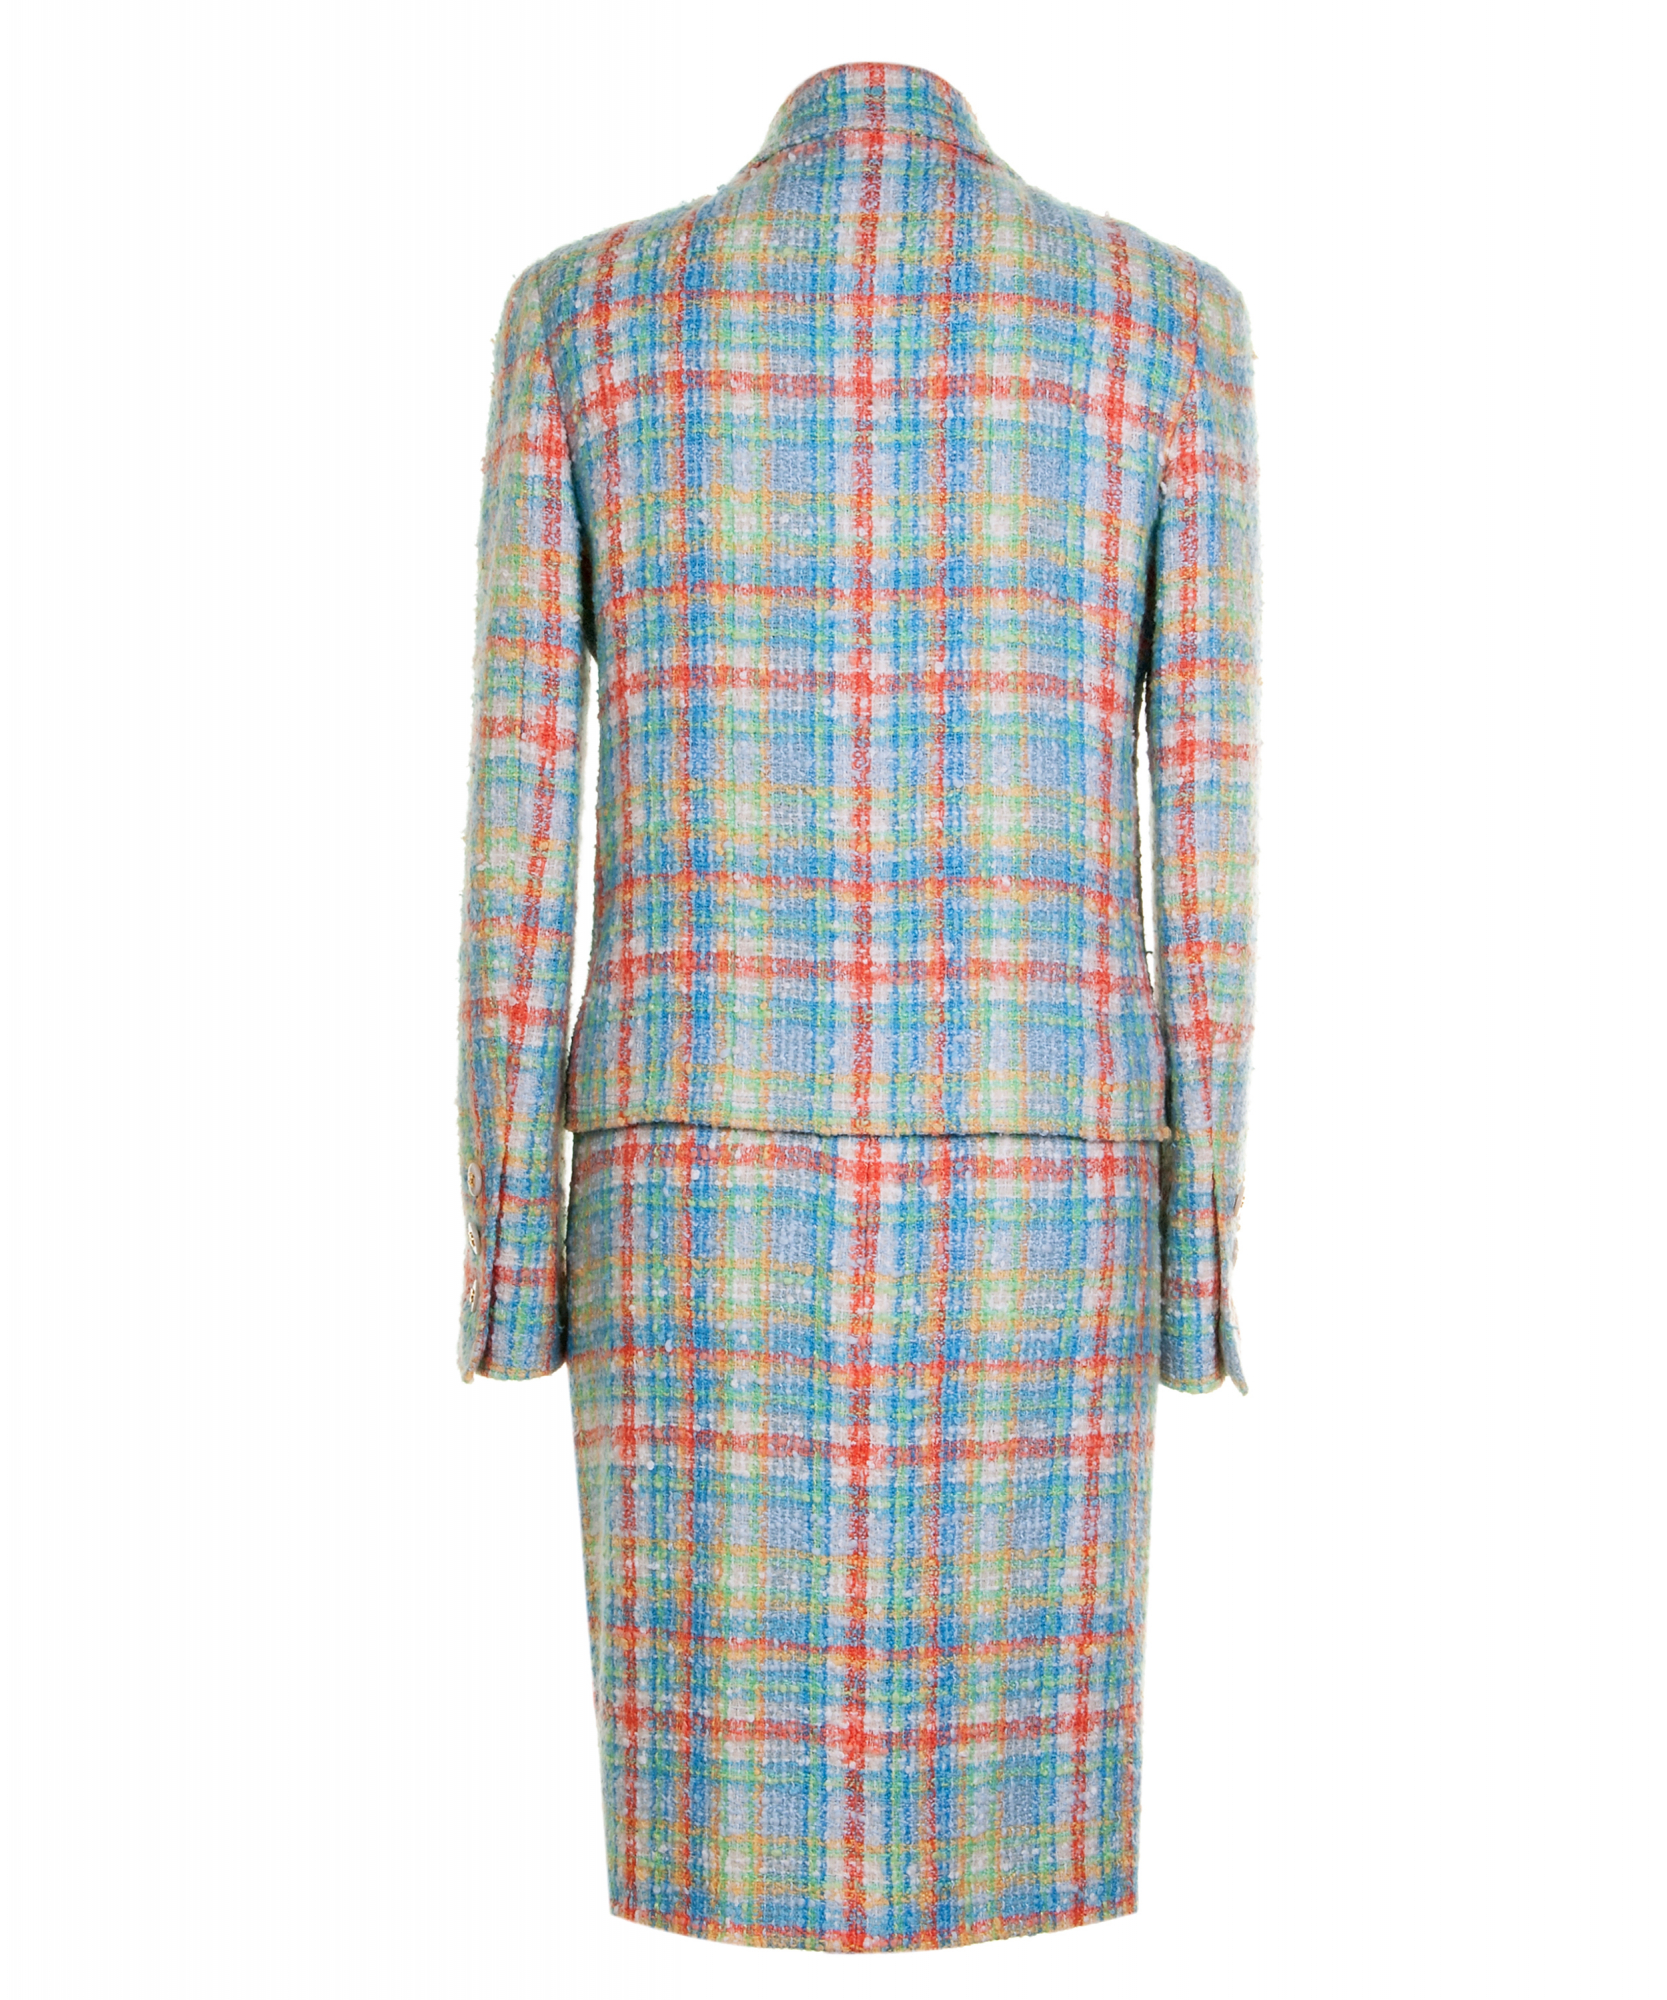 SS 1997 Chanel Runway Multicolor Tweed Skirt Suit - Chanel